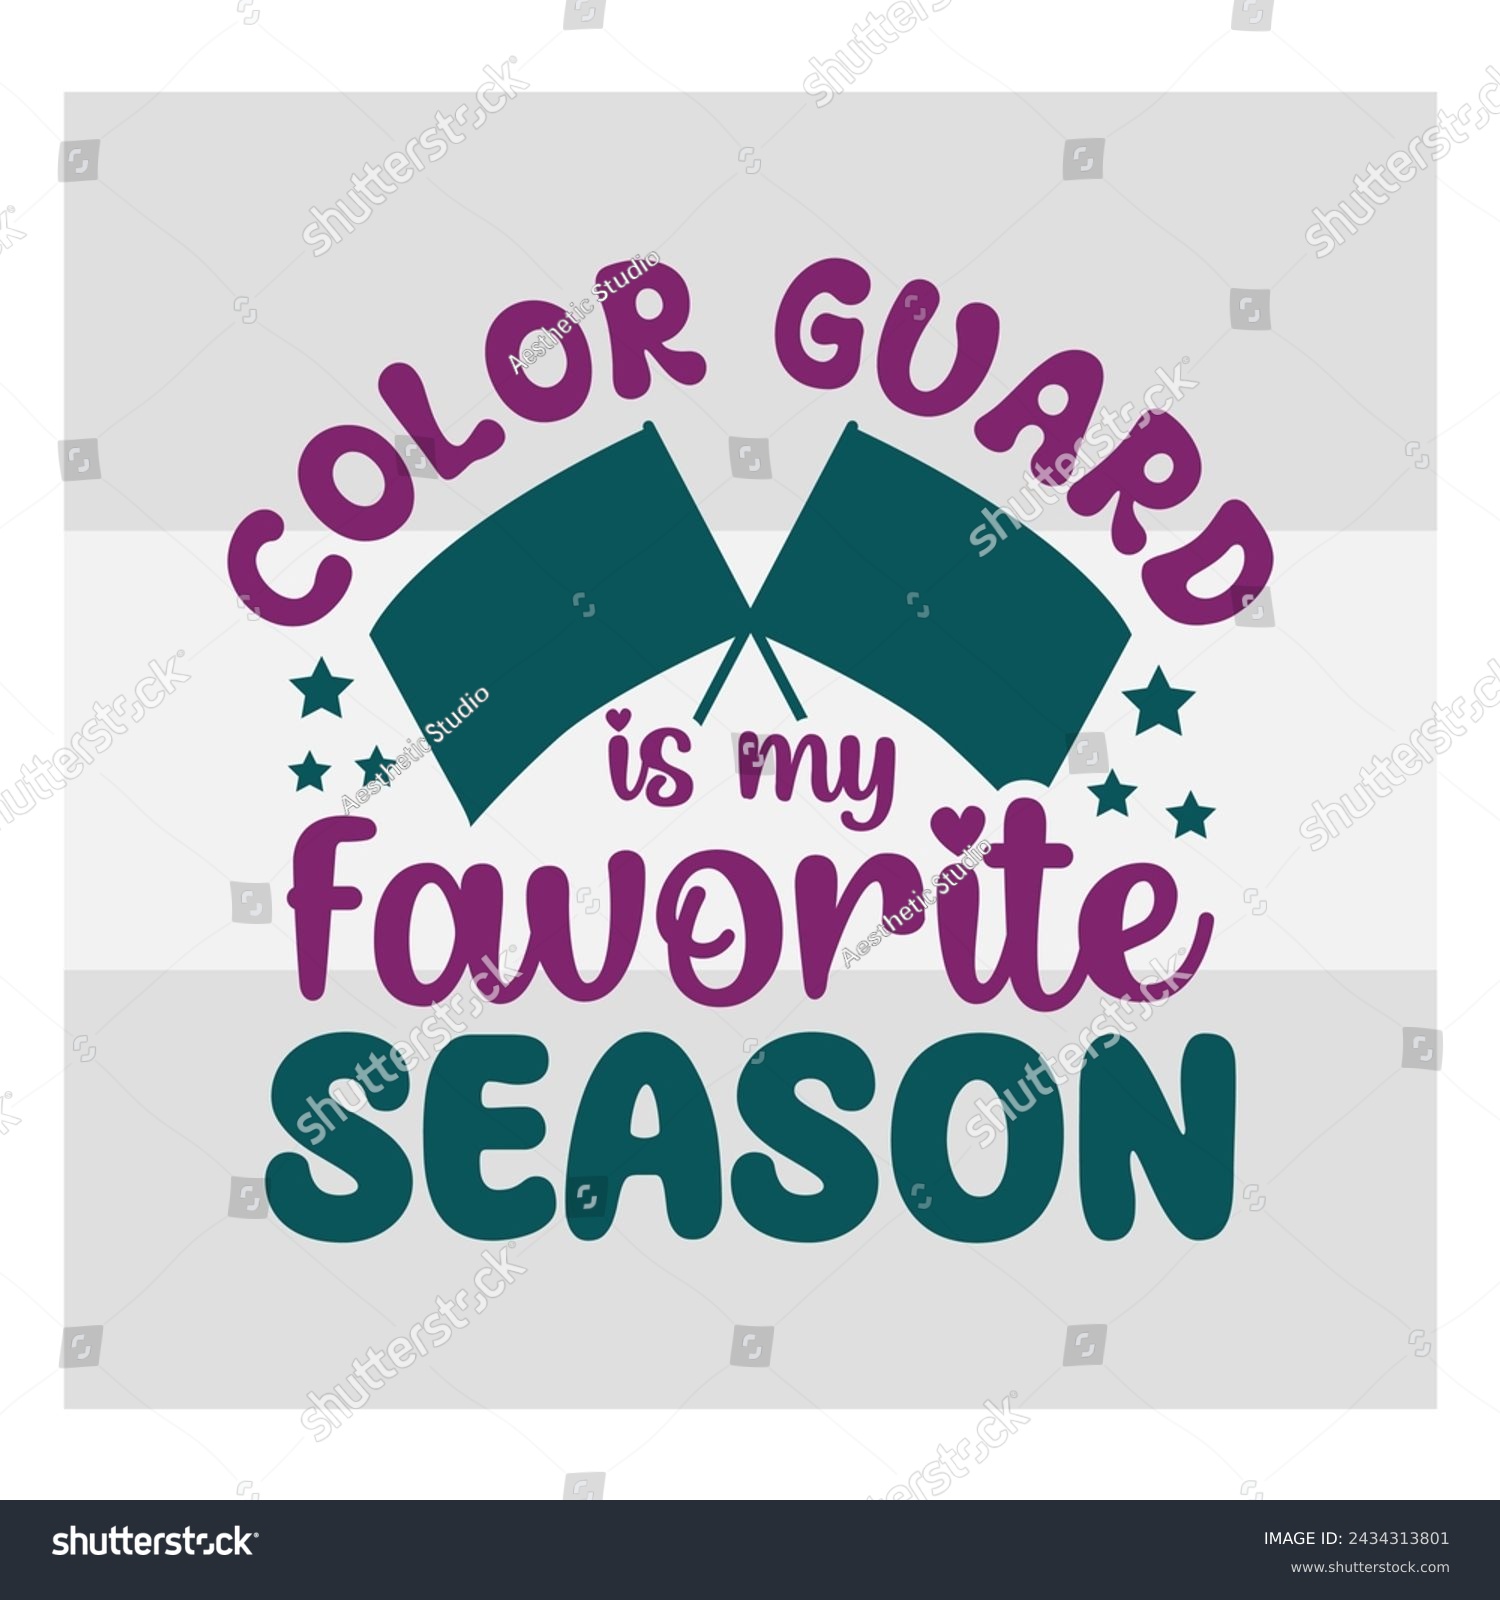 SVG of Color Guard Cut Files, Color Guard is my favorite Season, Color Guard Flag, Marching Band, Color Guard Quotes, Typography Design, t-shirt design svg